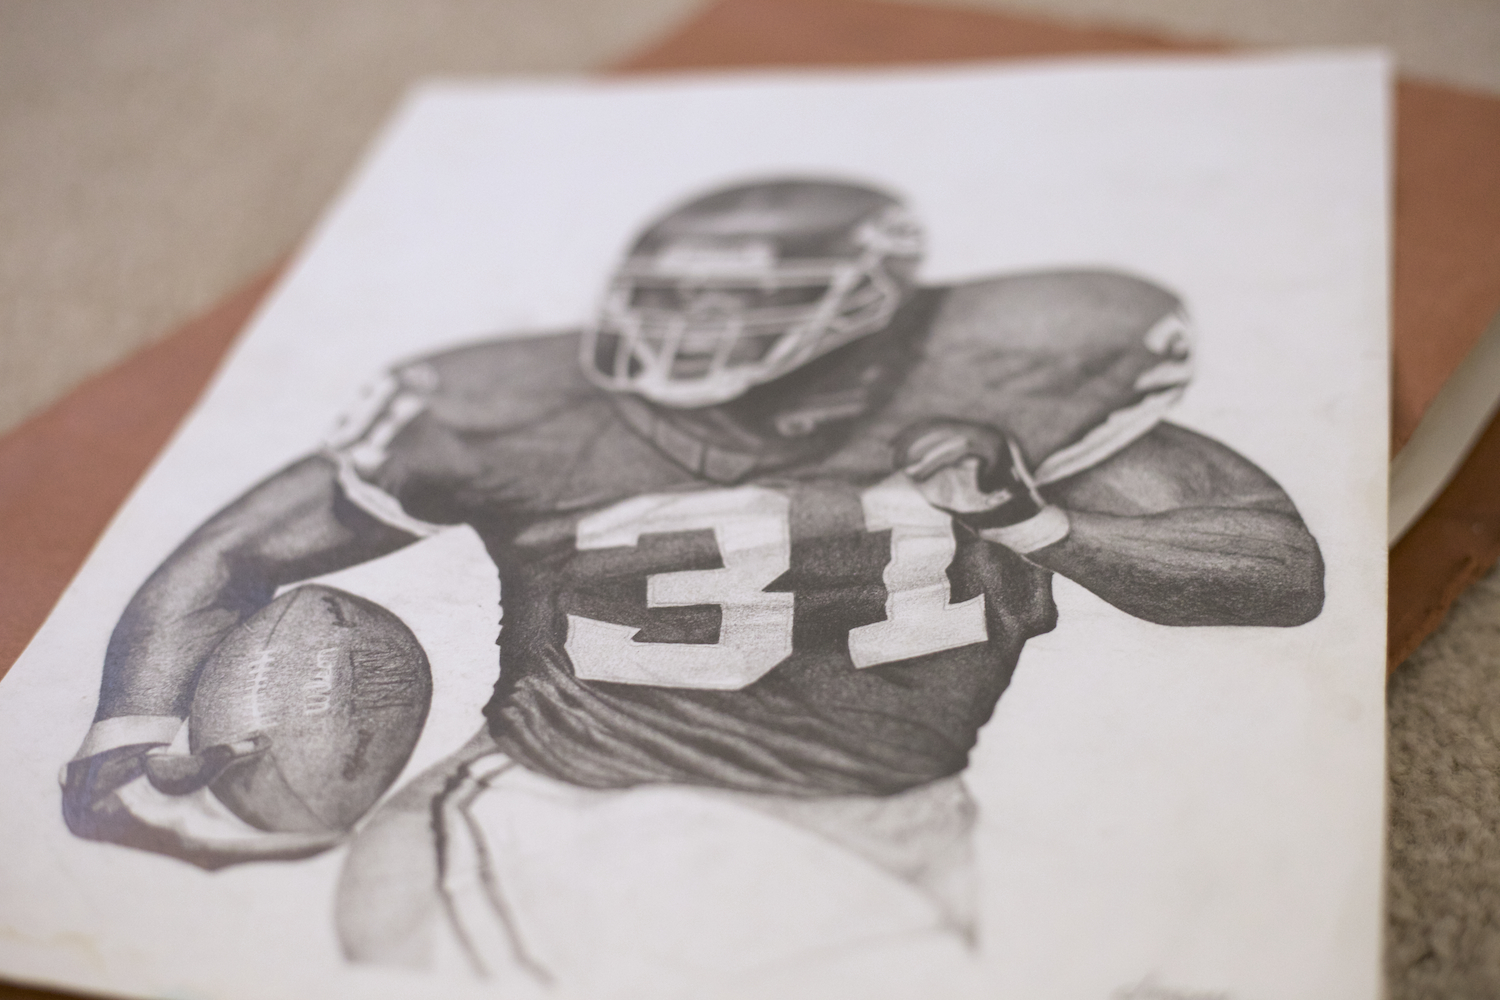 local-sketch-artist-for-hire-priest-holmes-drawn-portrait-for-sale-HOF-artist-for-nfl-players-custom-pencil-drawing-portraits-for-sale